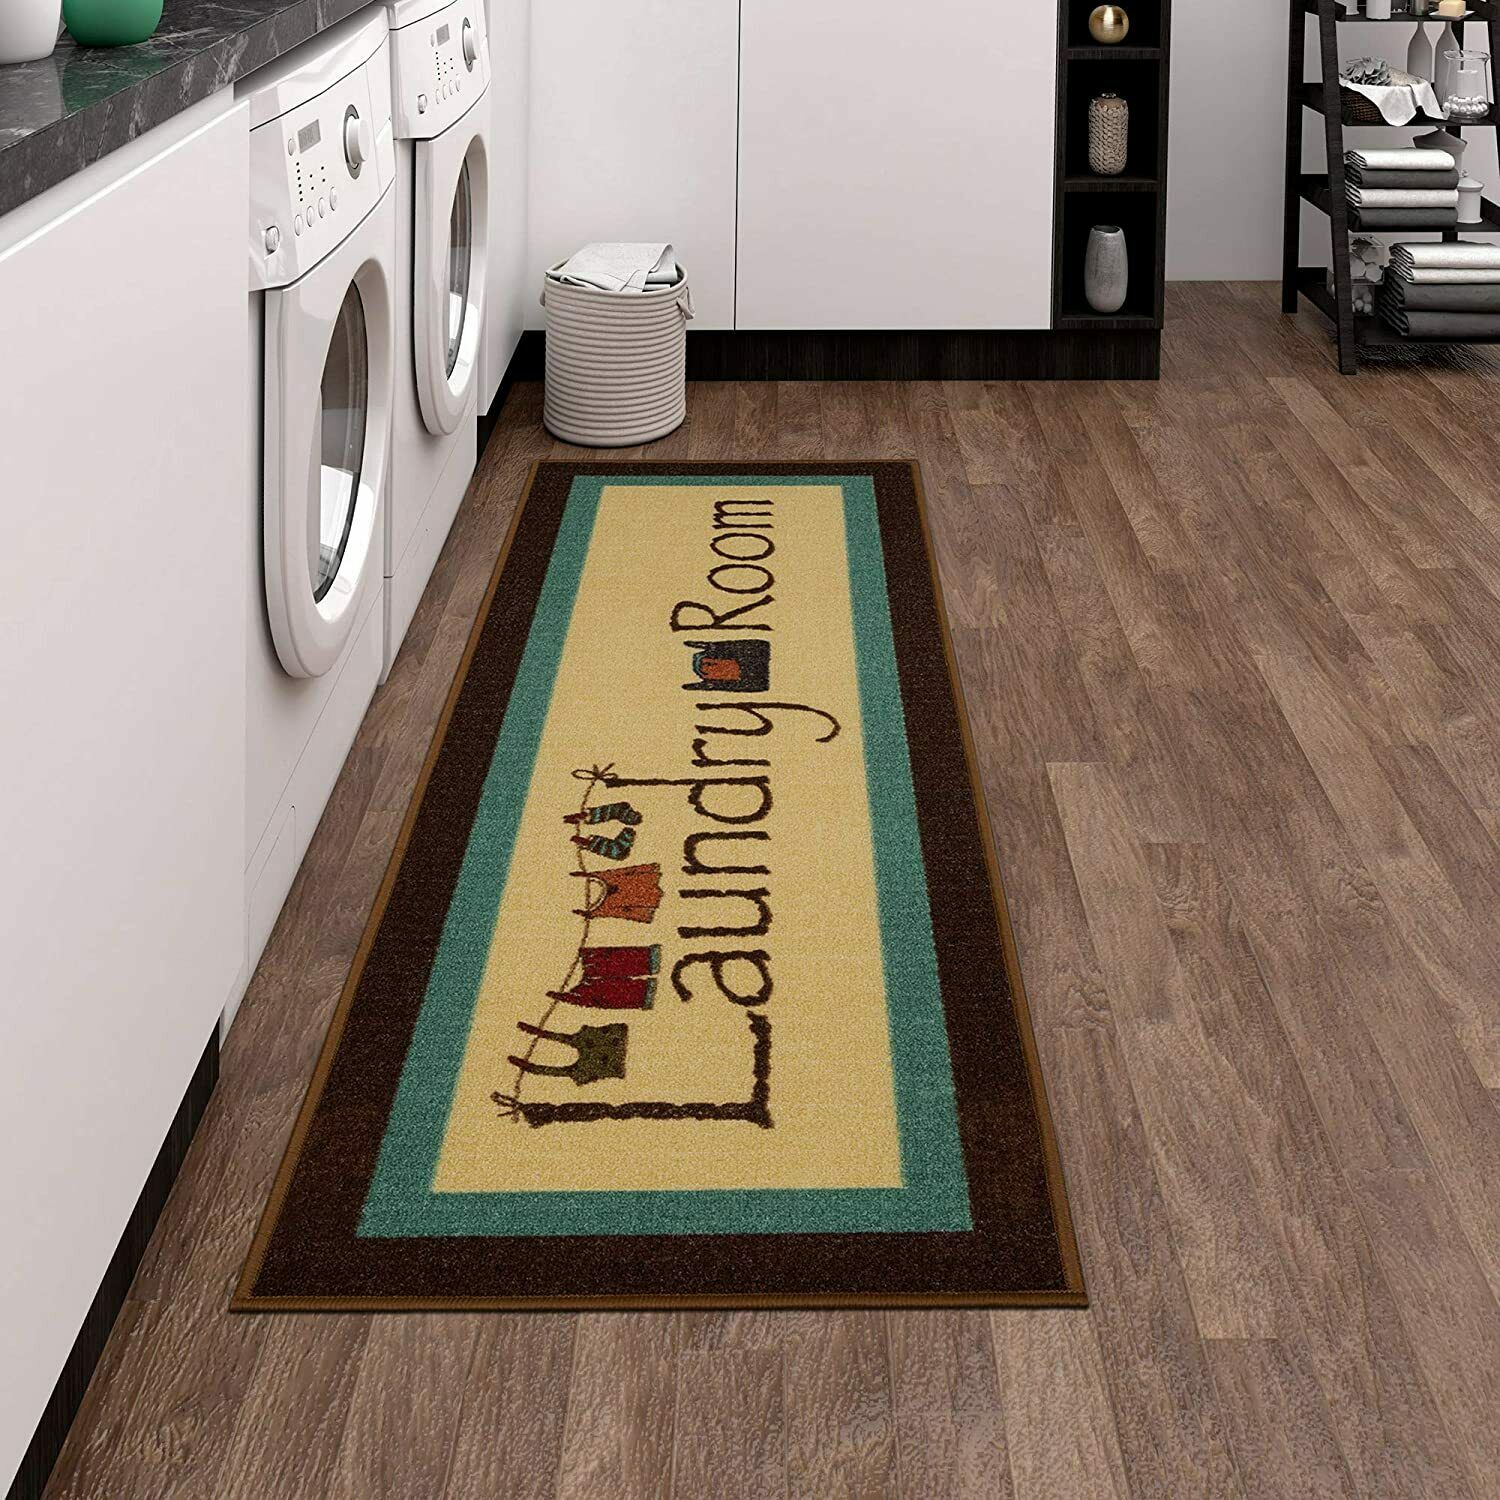 Carpet Runners for Laundry Area